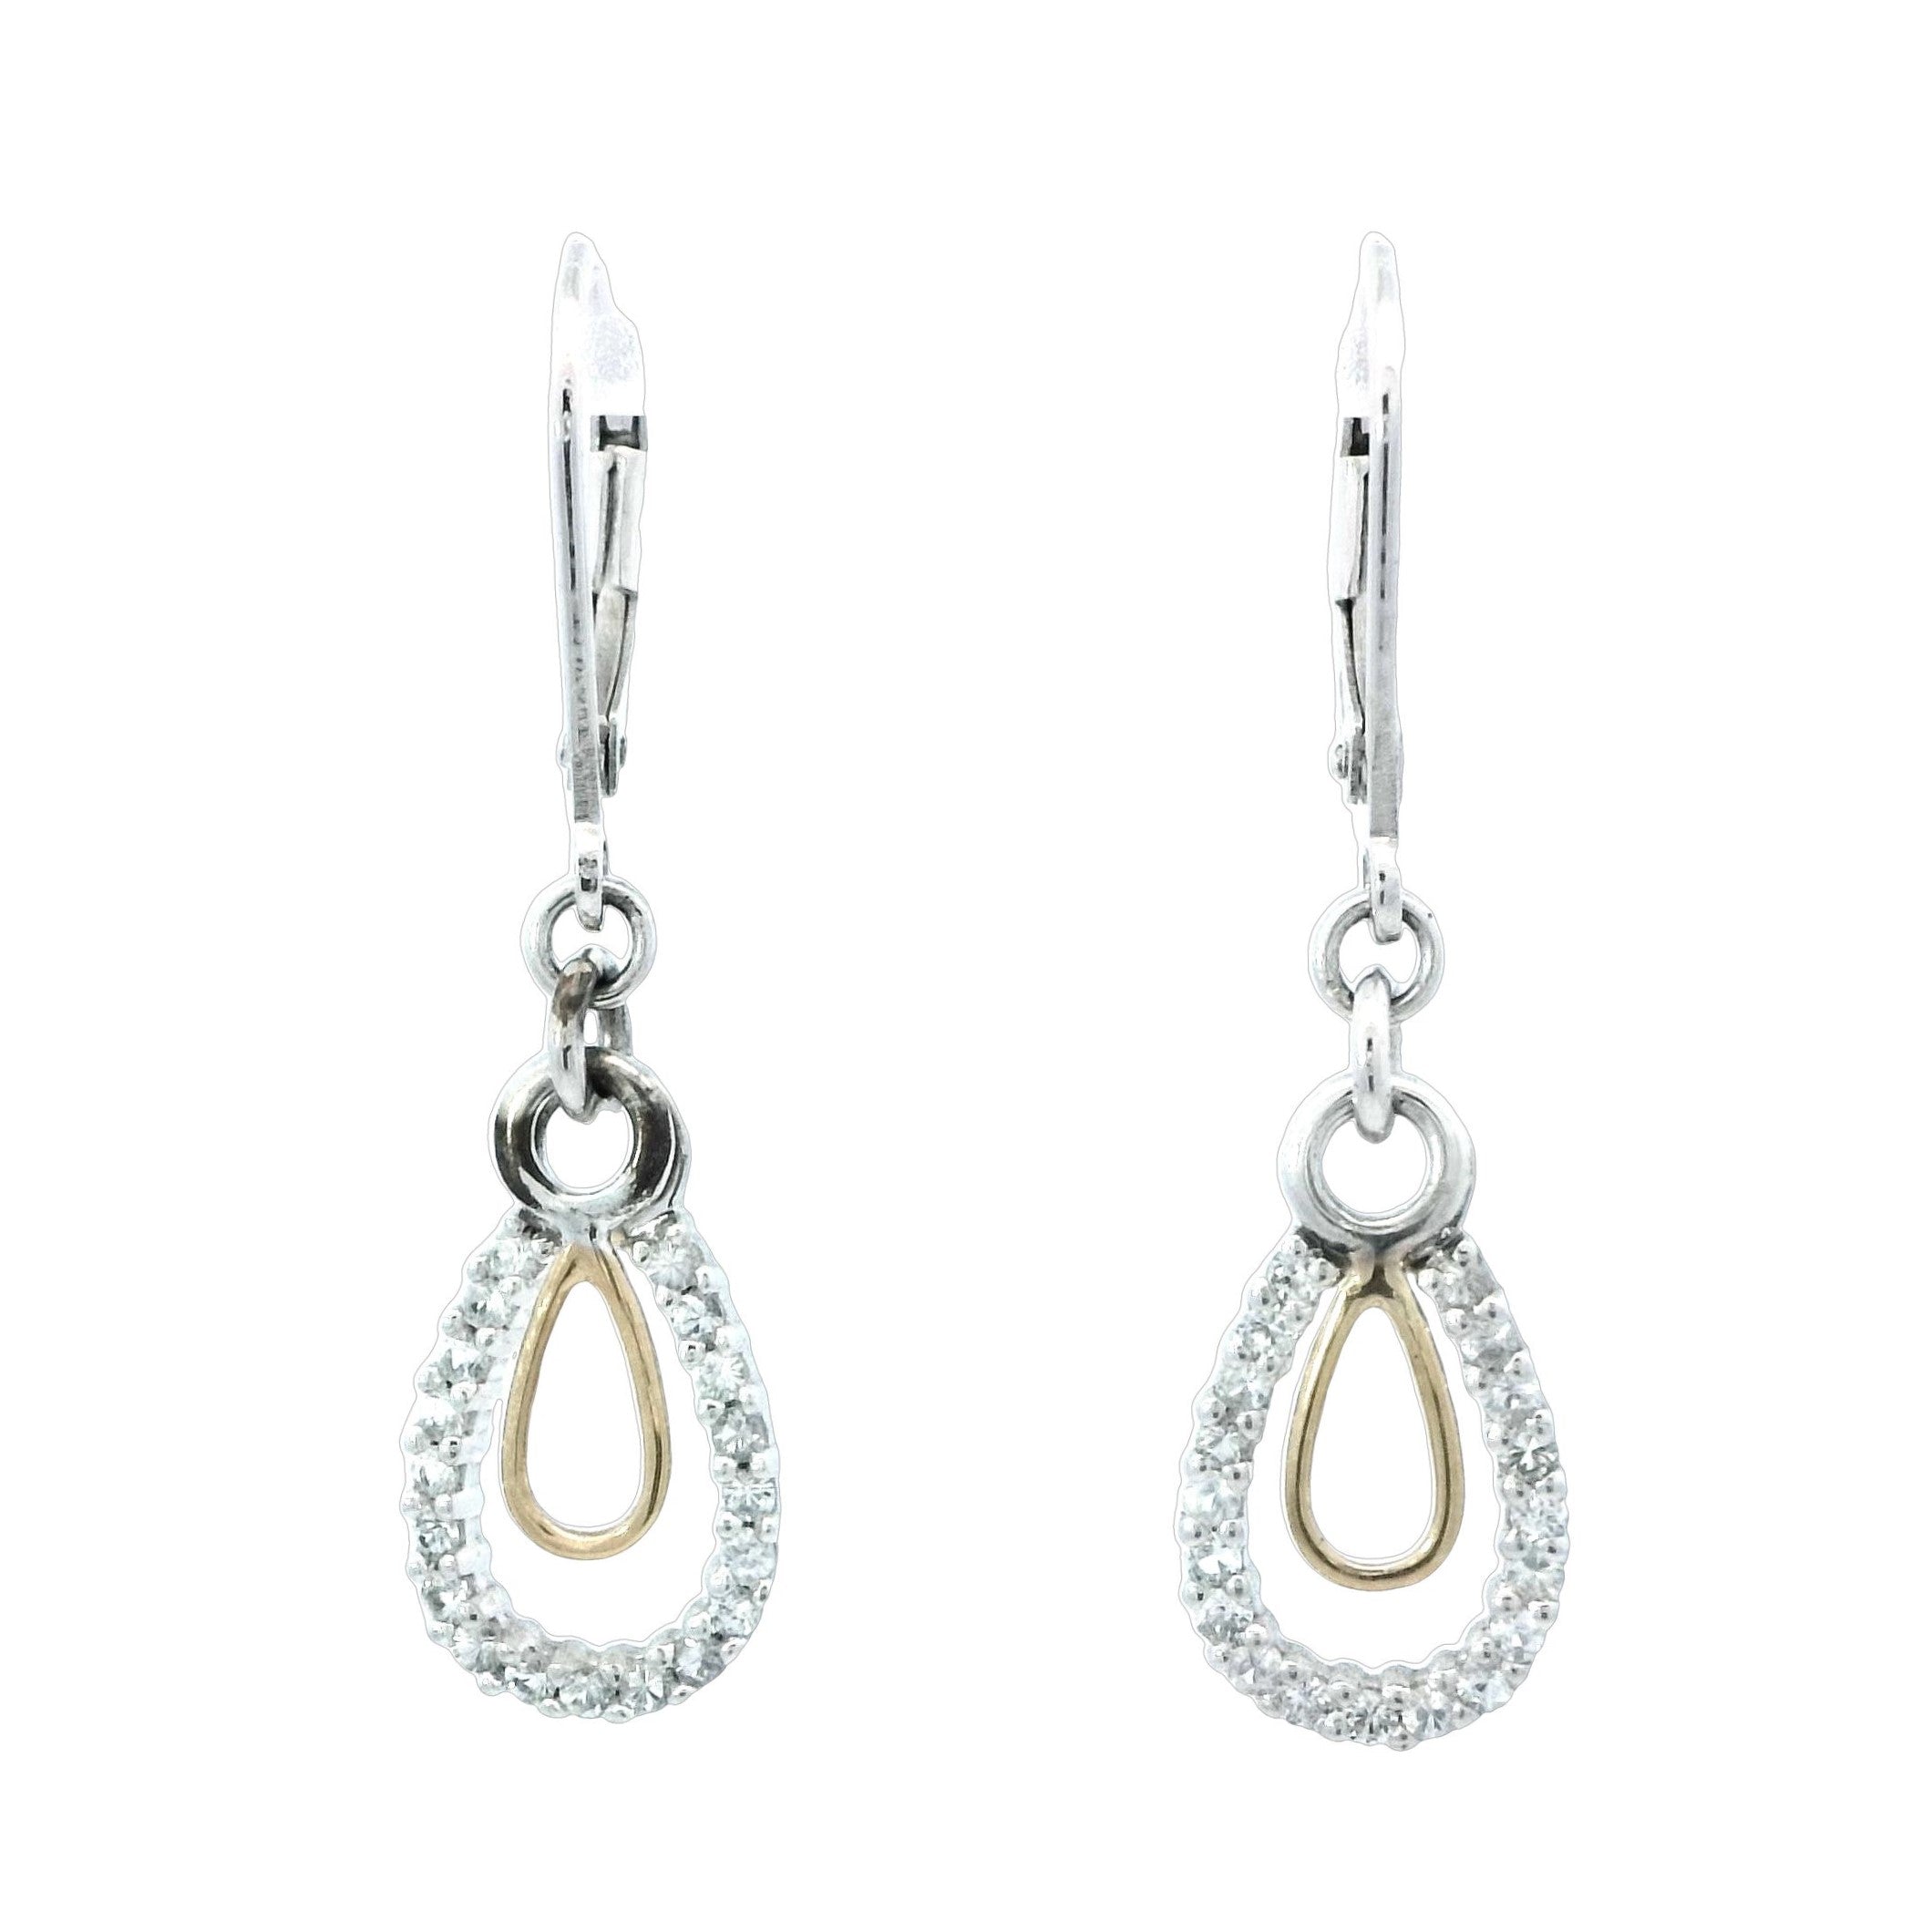 Denny Wong Silver and Gold Leverback Earrings